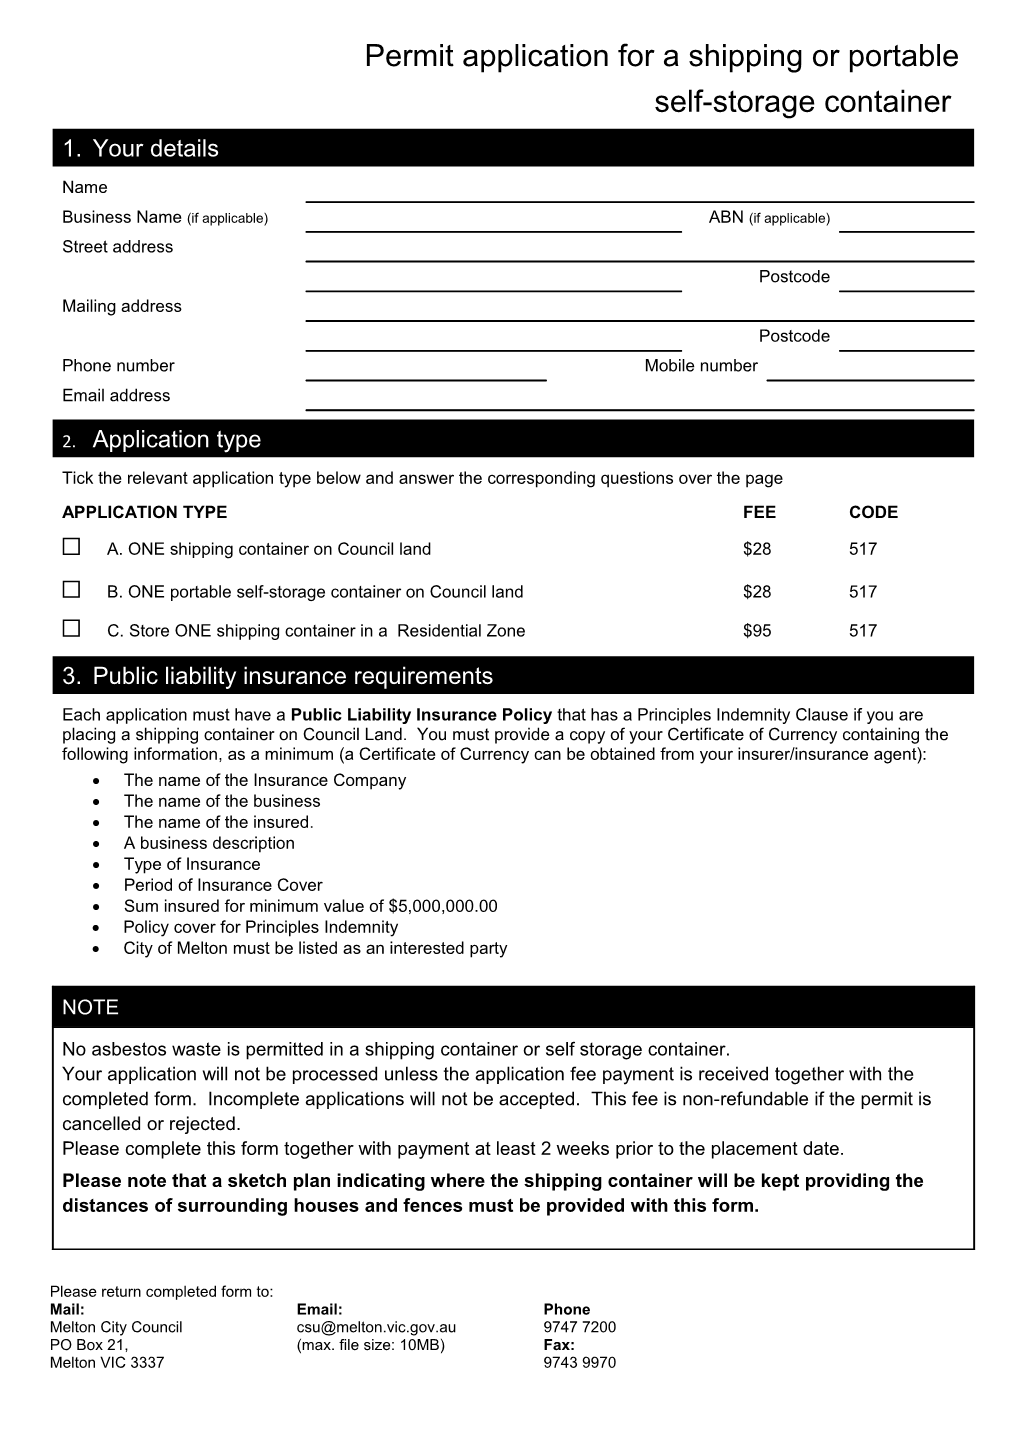 Permit Application for a Shipping Or Portable